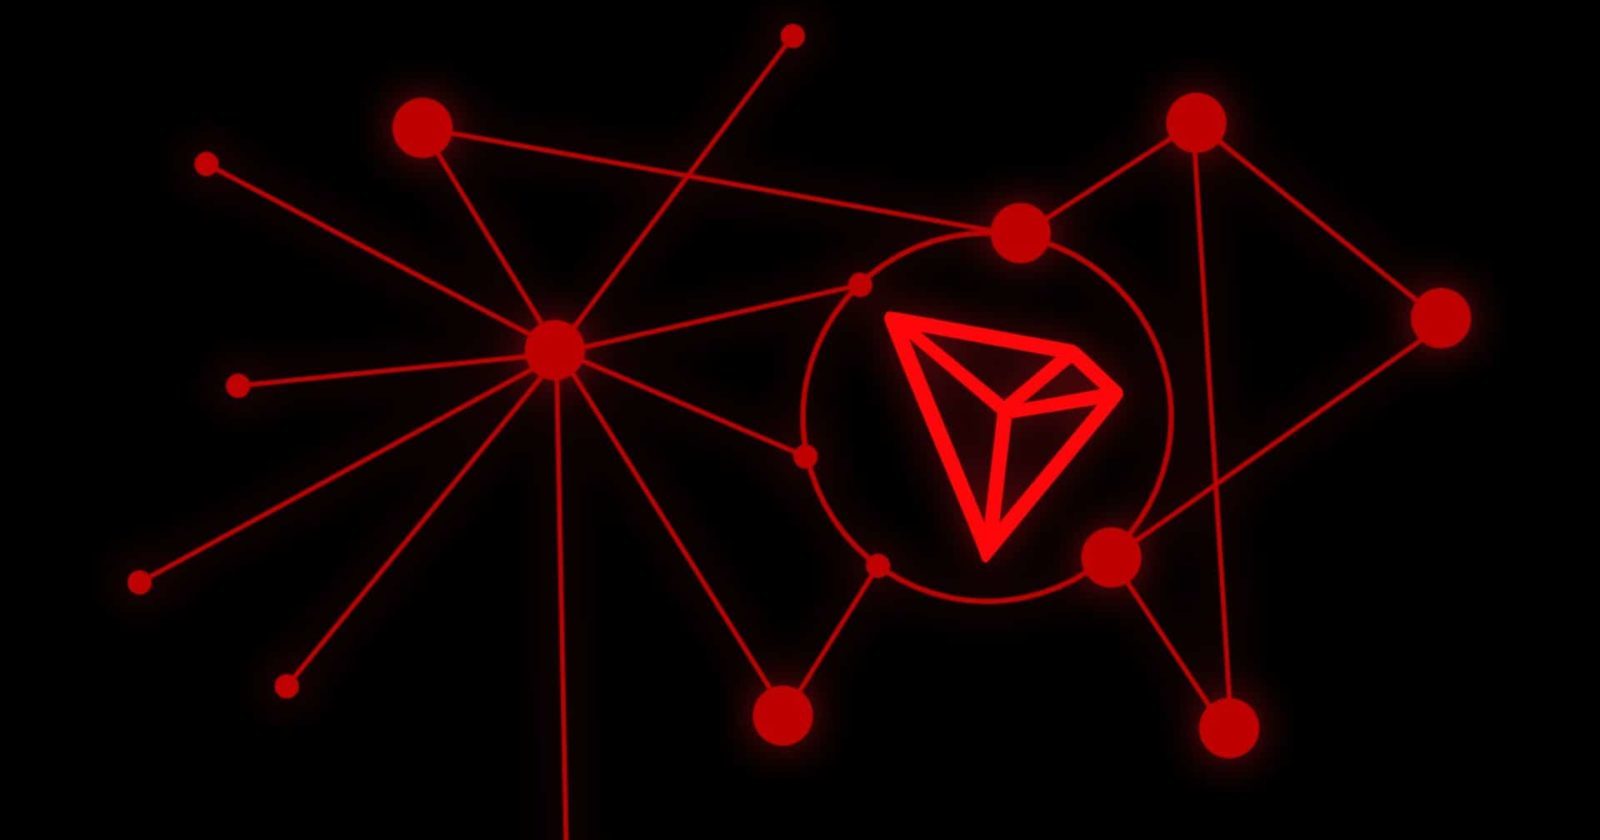 TRON: Huobi Comes Clear On Justin Sun's Role